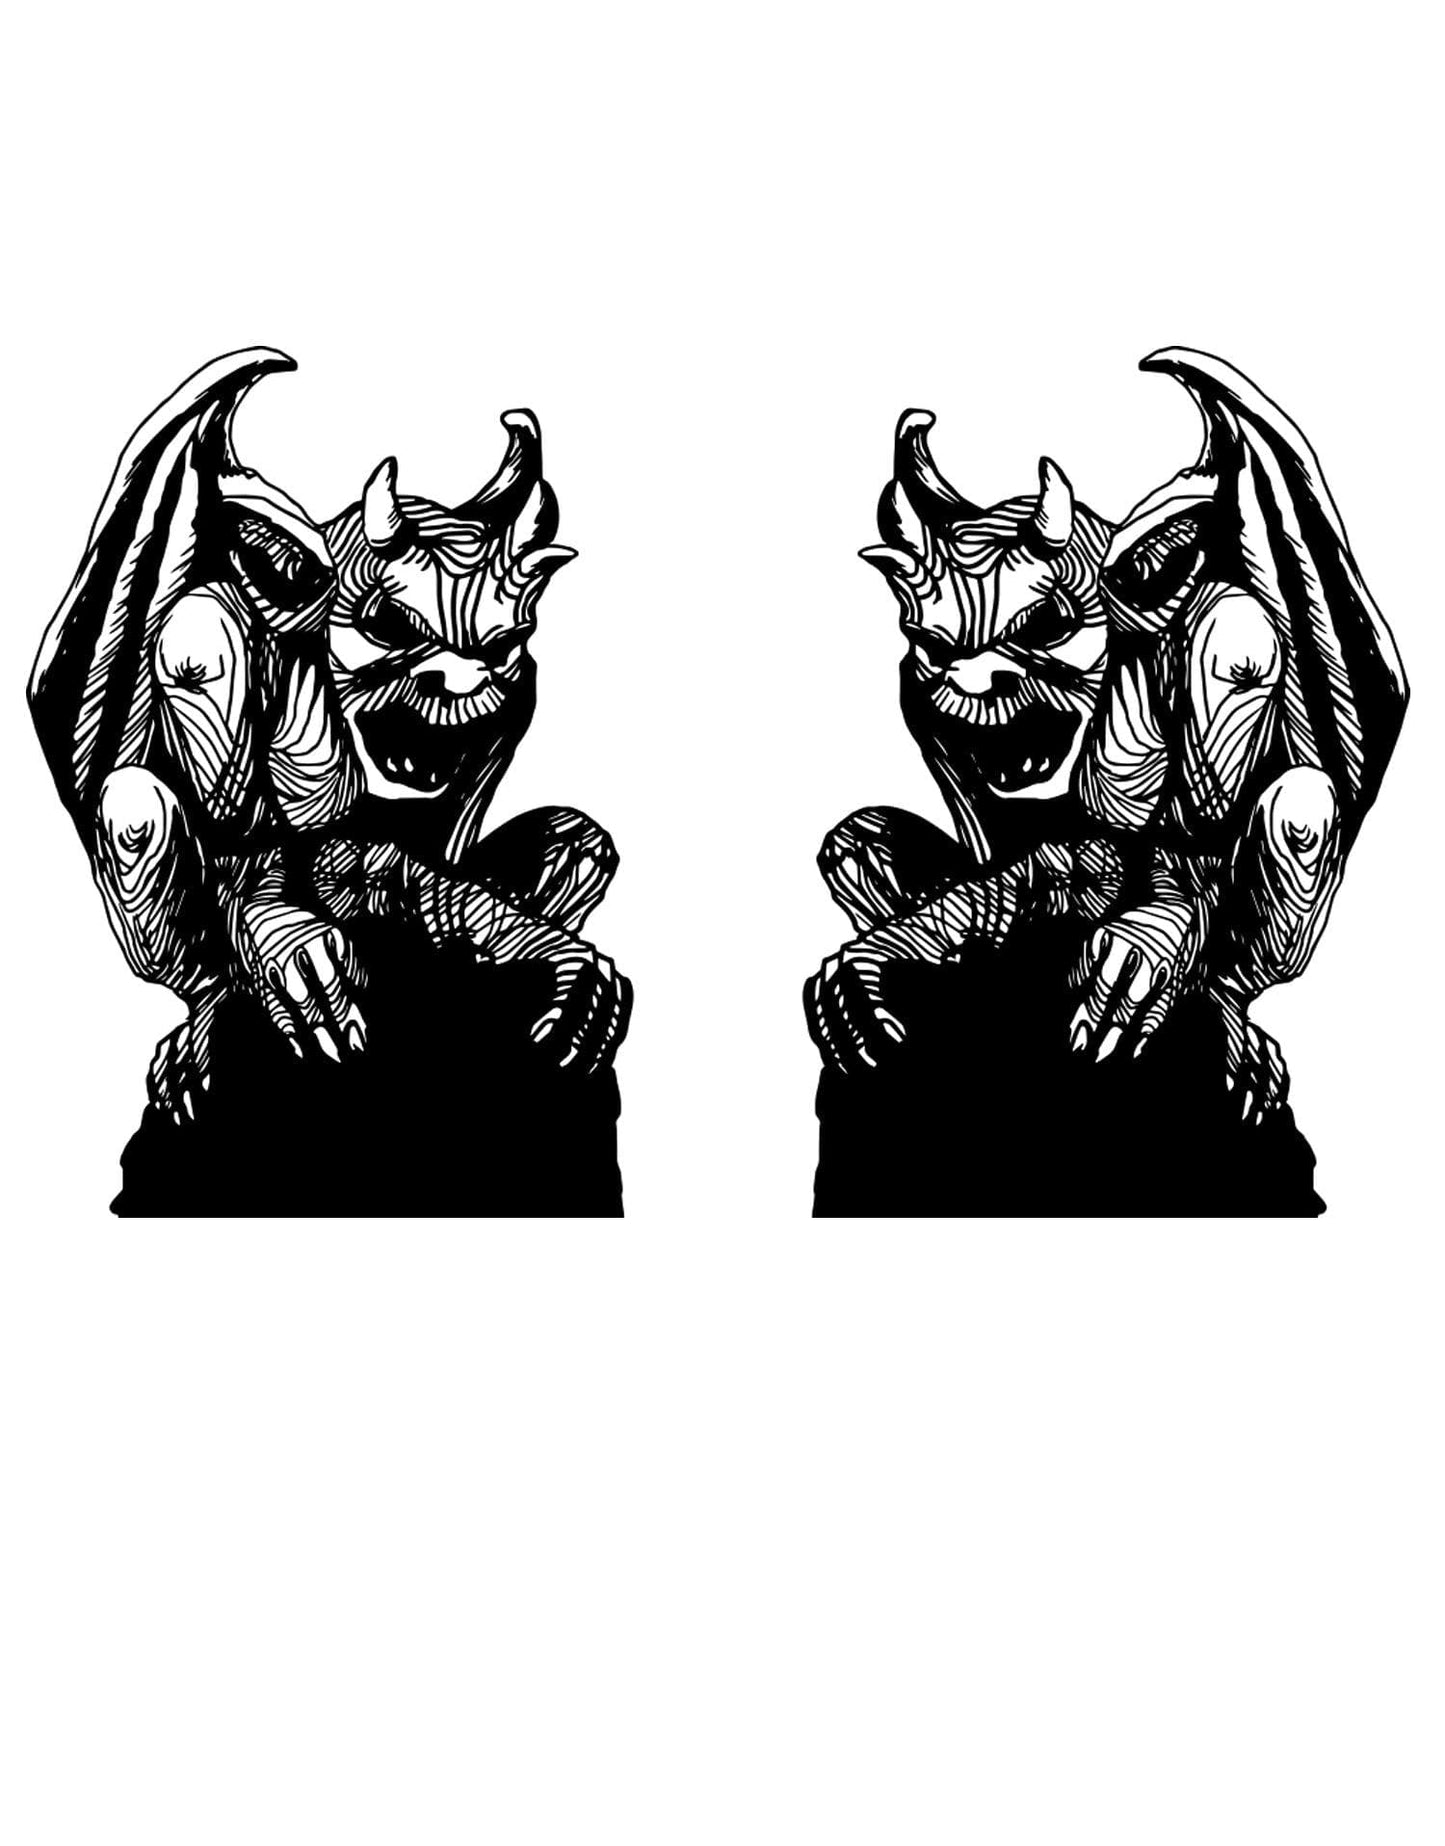 Gargoyles of Notre Dame Statue Wall Decal. Gothic Theme. (Set of 2) #OS_MB536